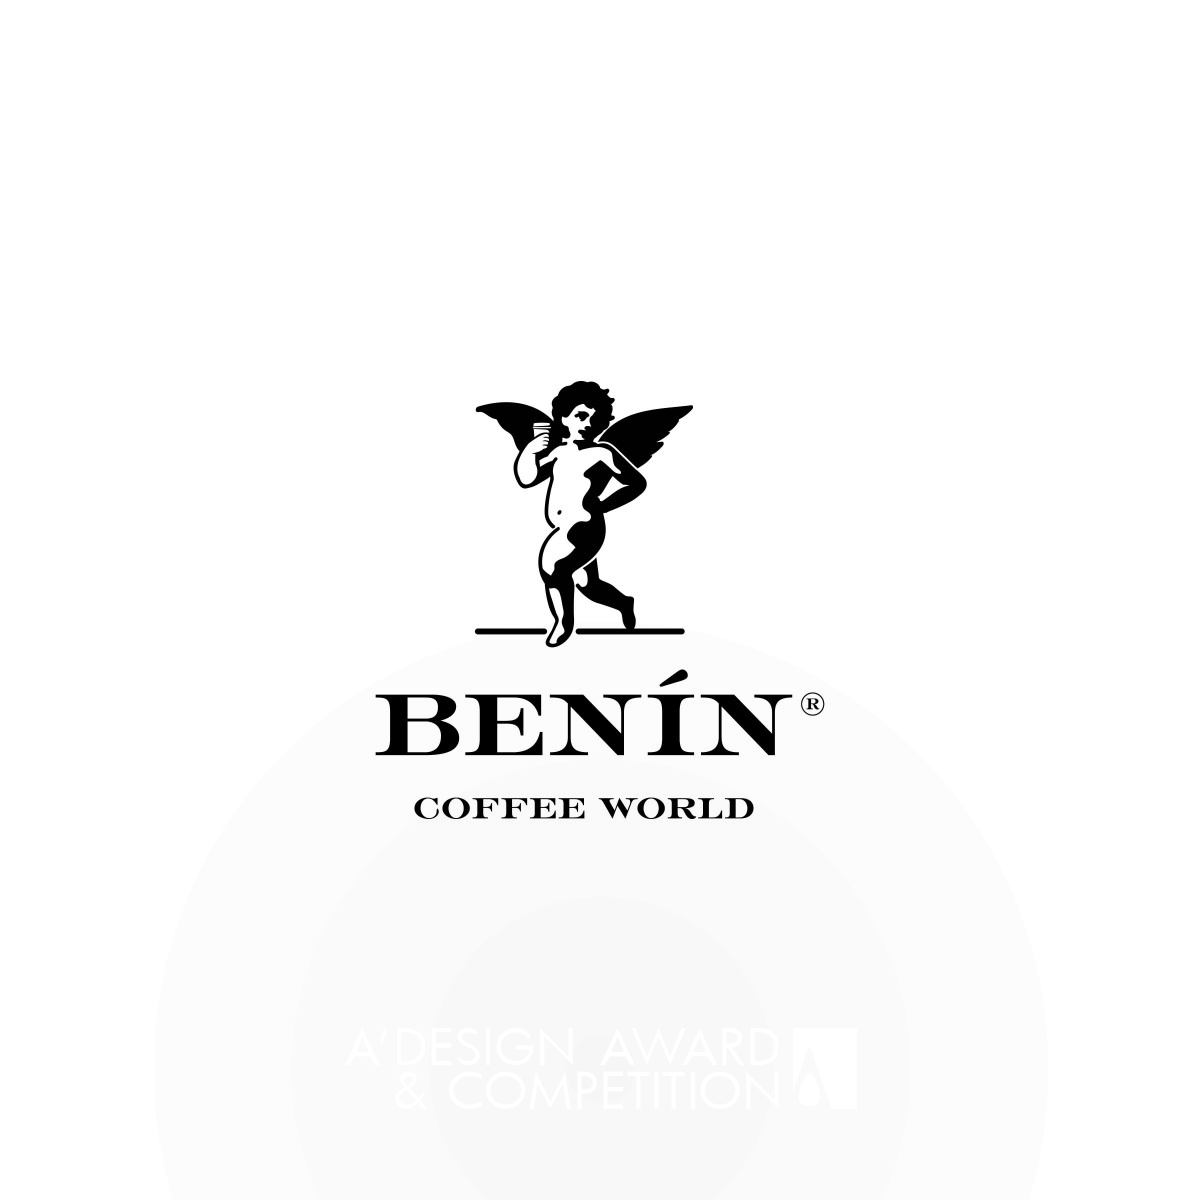 Benin&#039;s Visual Identity Transmits Happiness, Passion, and Feel-Good Vibes